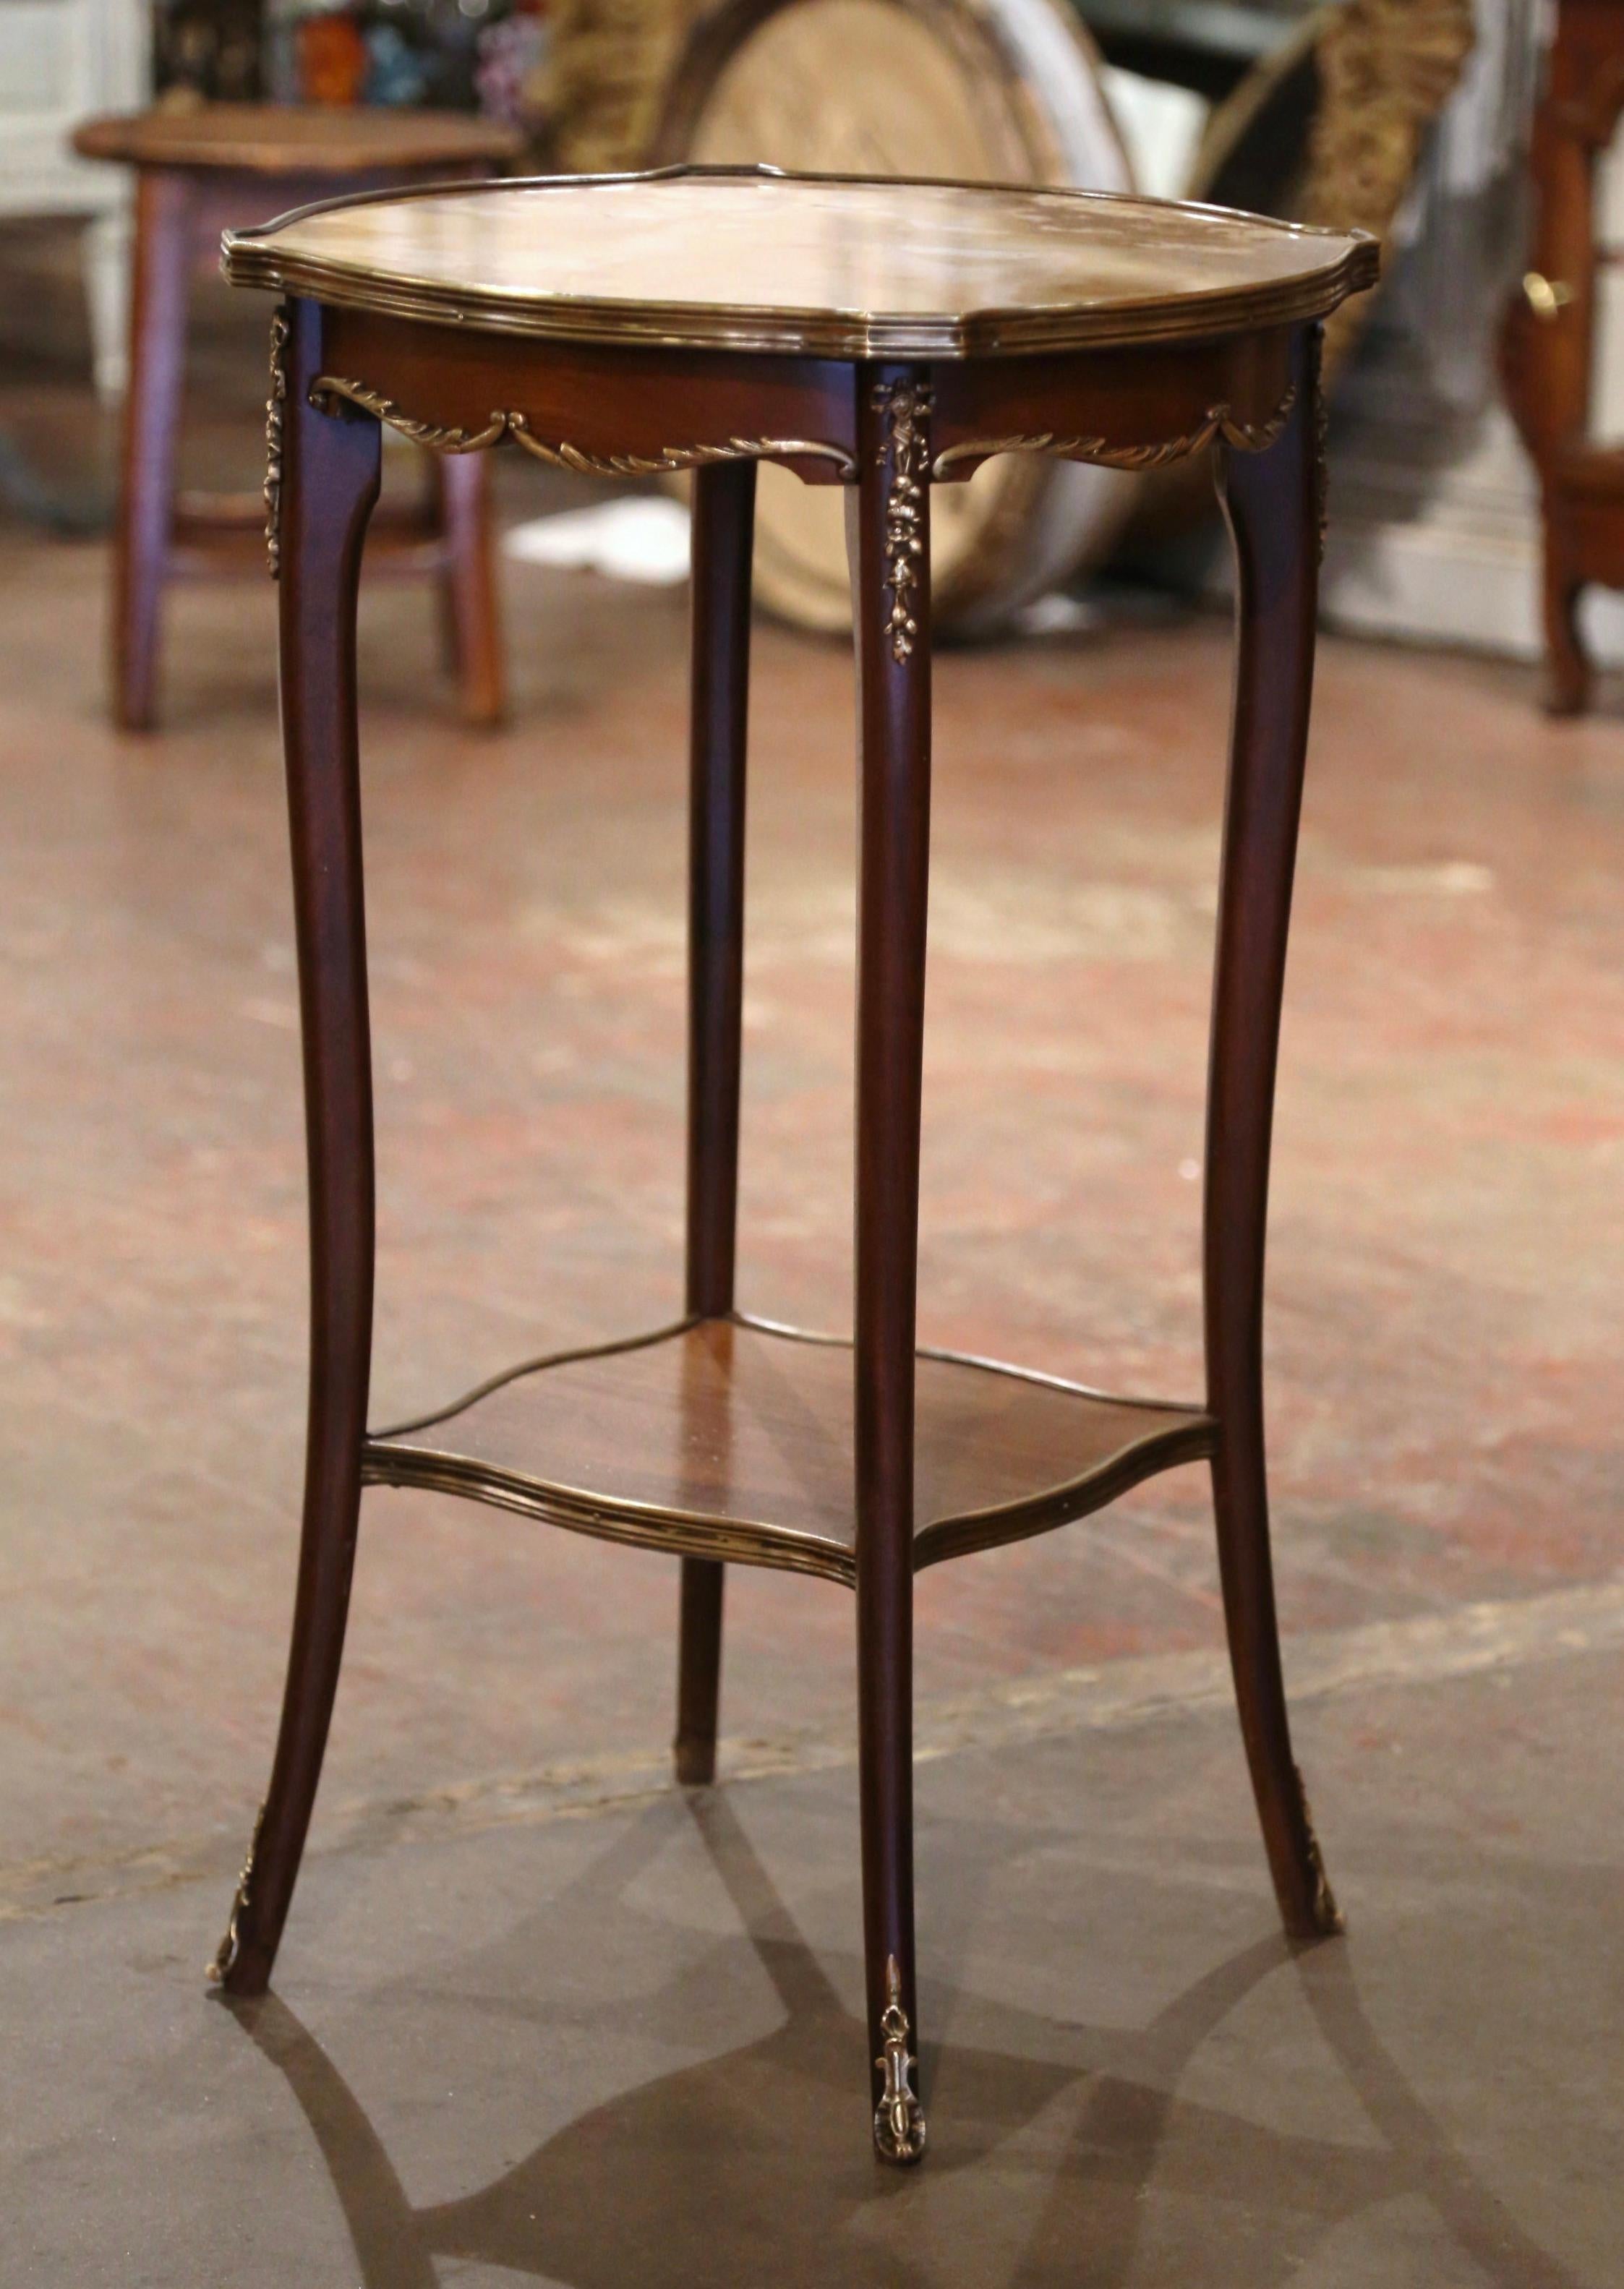  Decorate a den with this elegant antique side table. Crafted in France circa 1950, and round in shape with recessed corners, the table sits on cabriole legs dressed with decorative bronze mounts at the shoulders and ending with bronze sabots. The